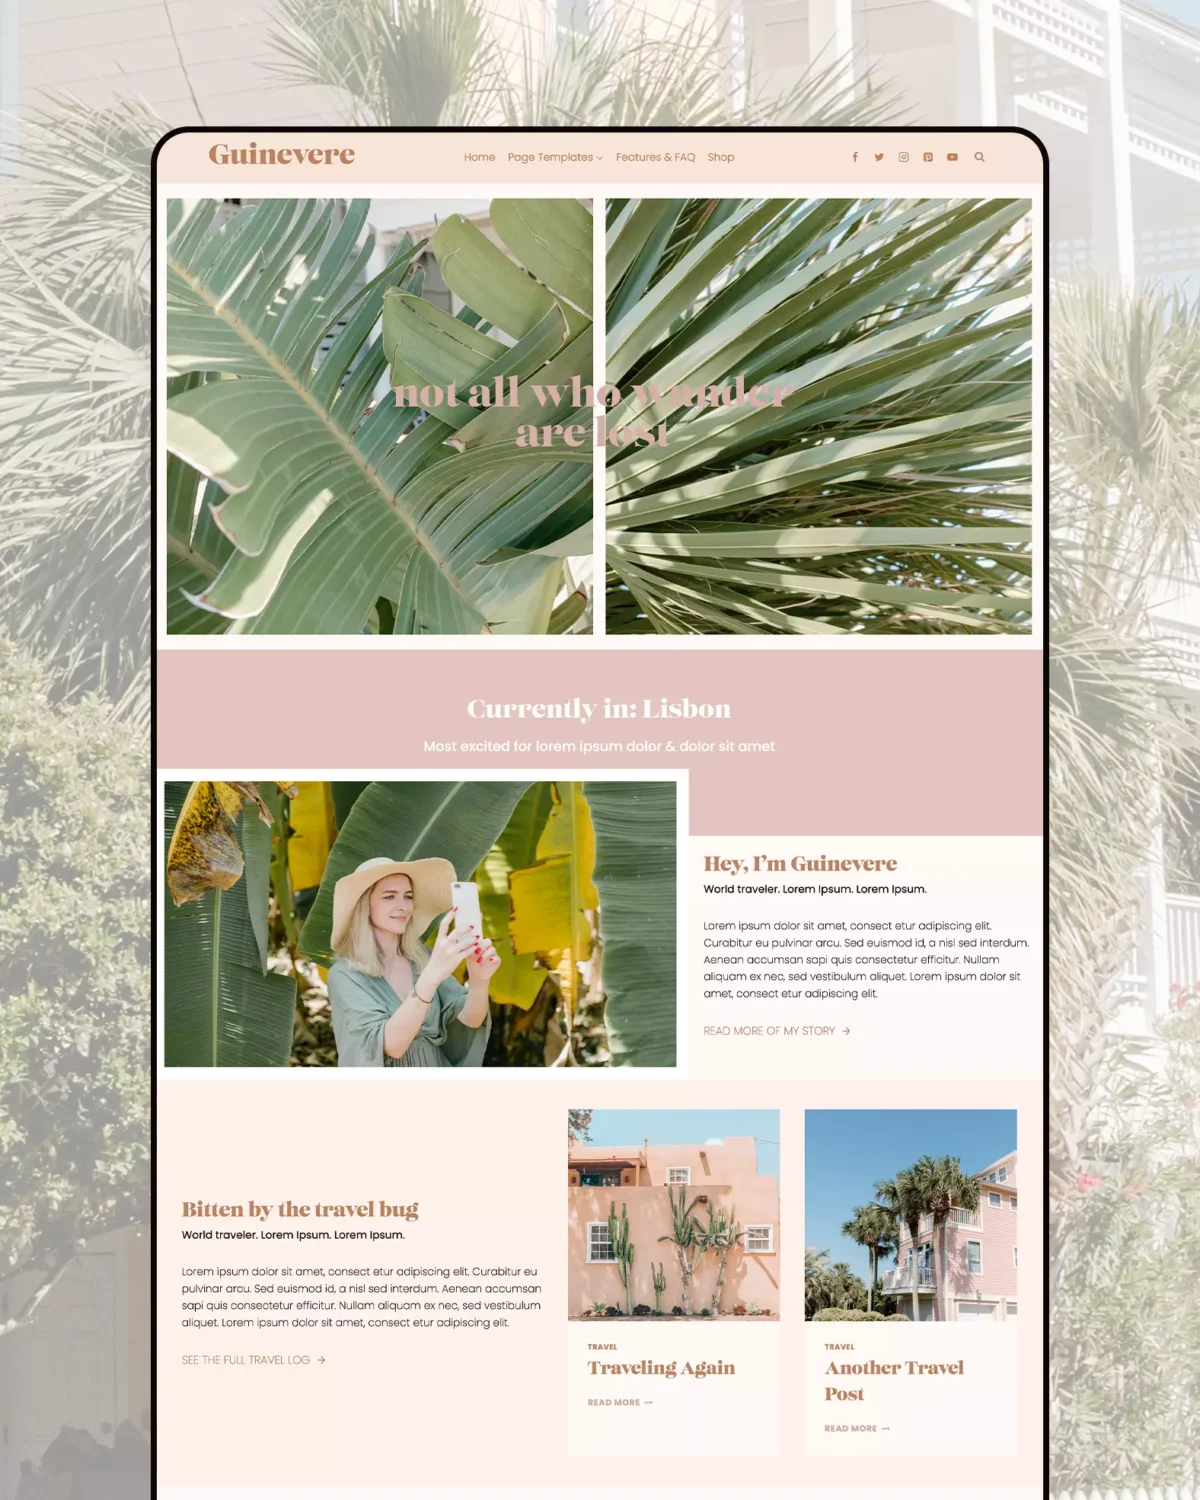 Image showing the Guinevere WordPress theme home page on an iPad. Background is a semi-transparent image of plants.